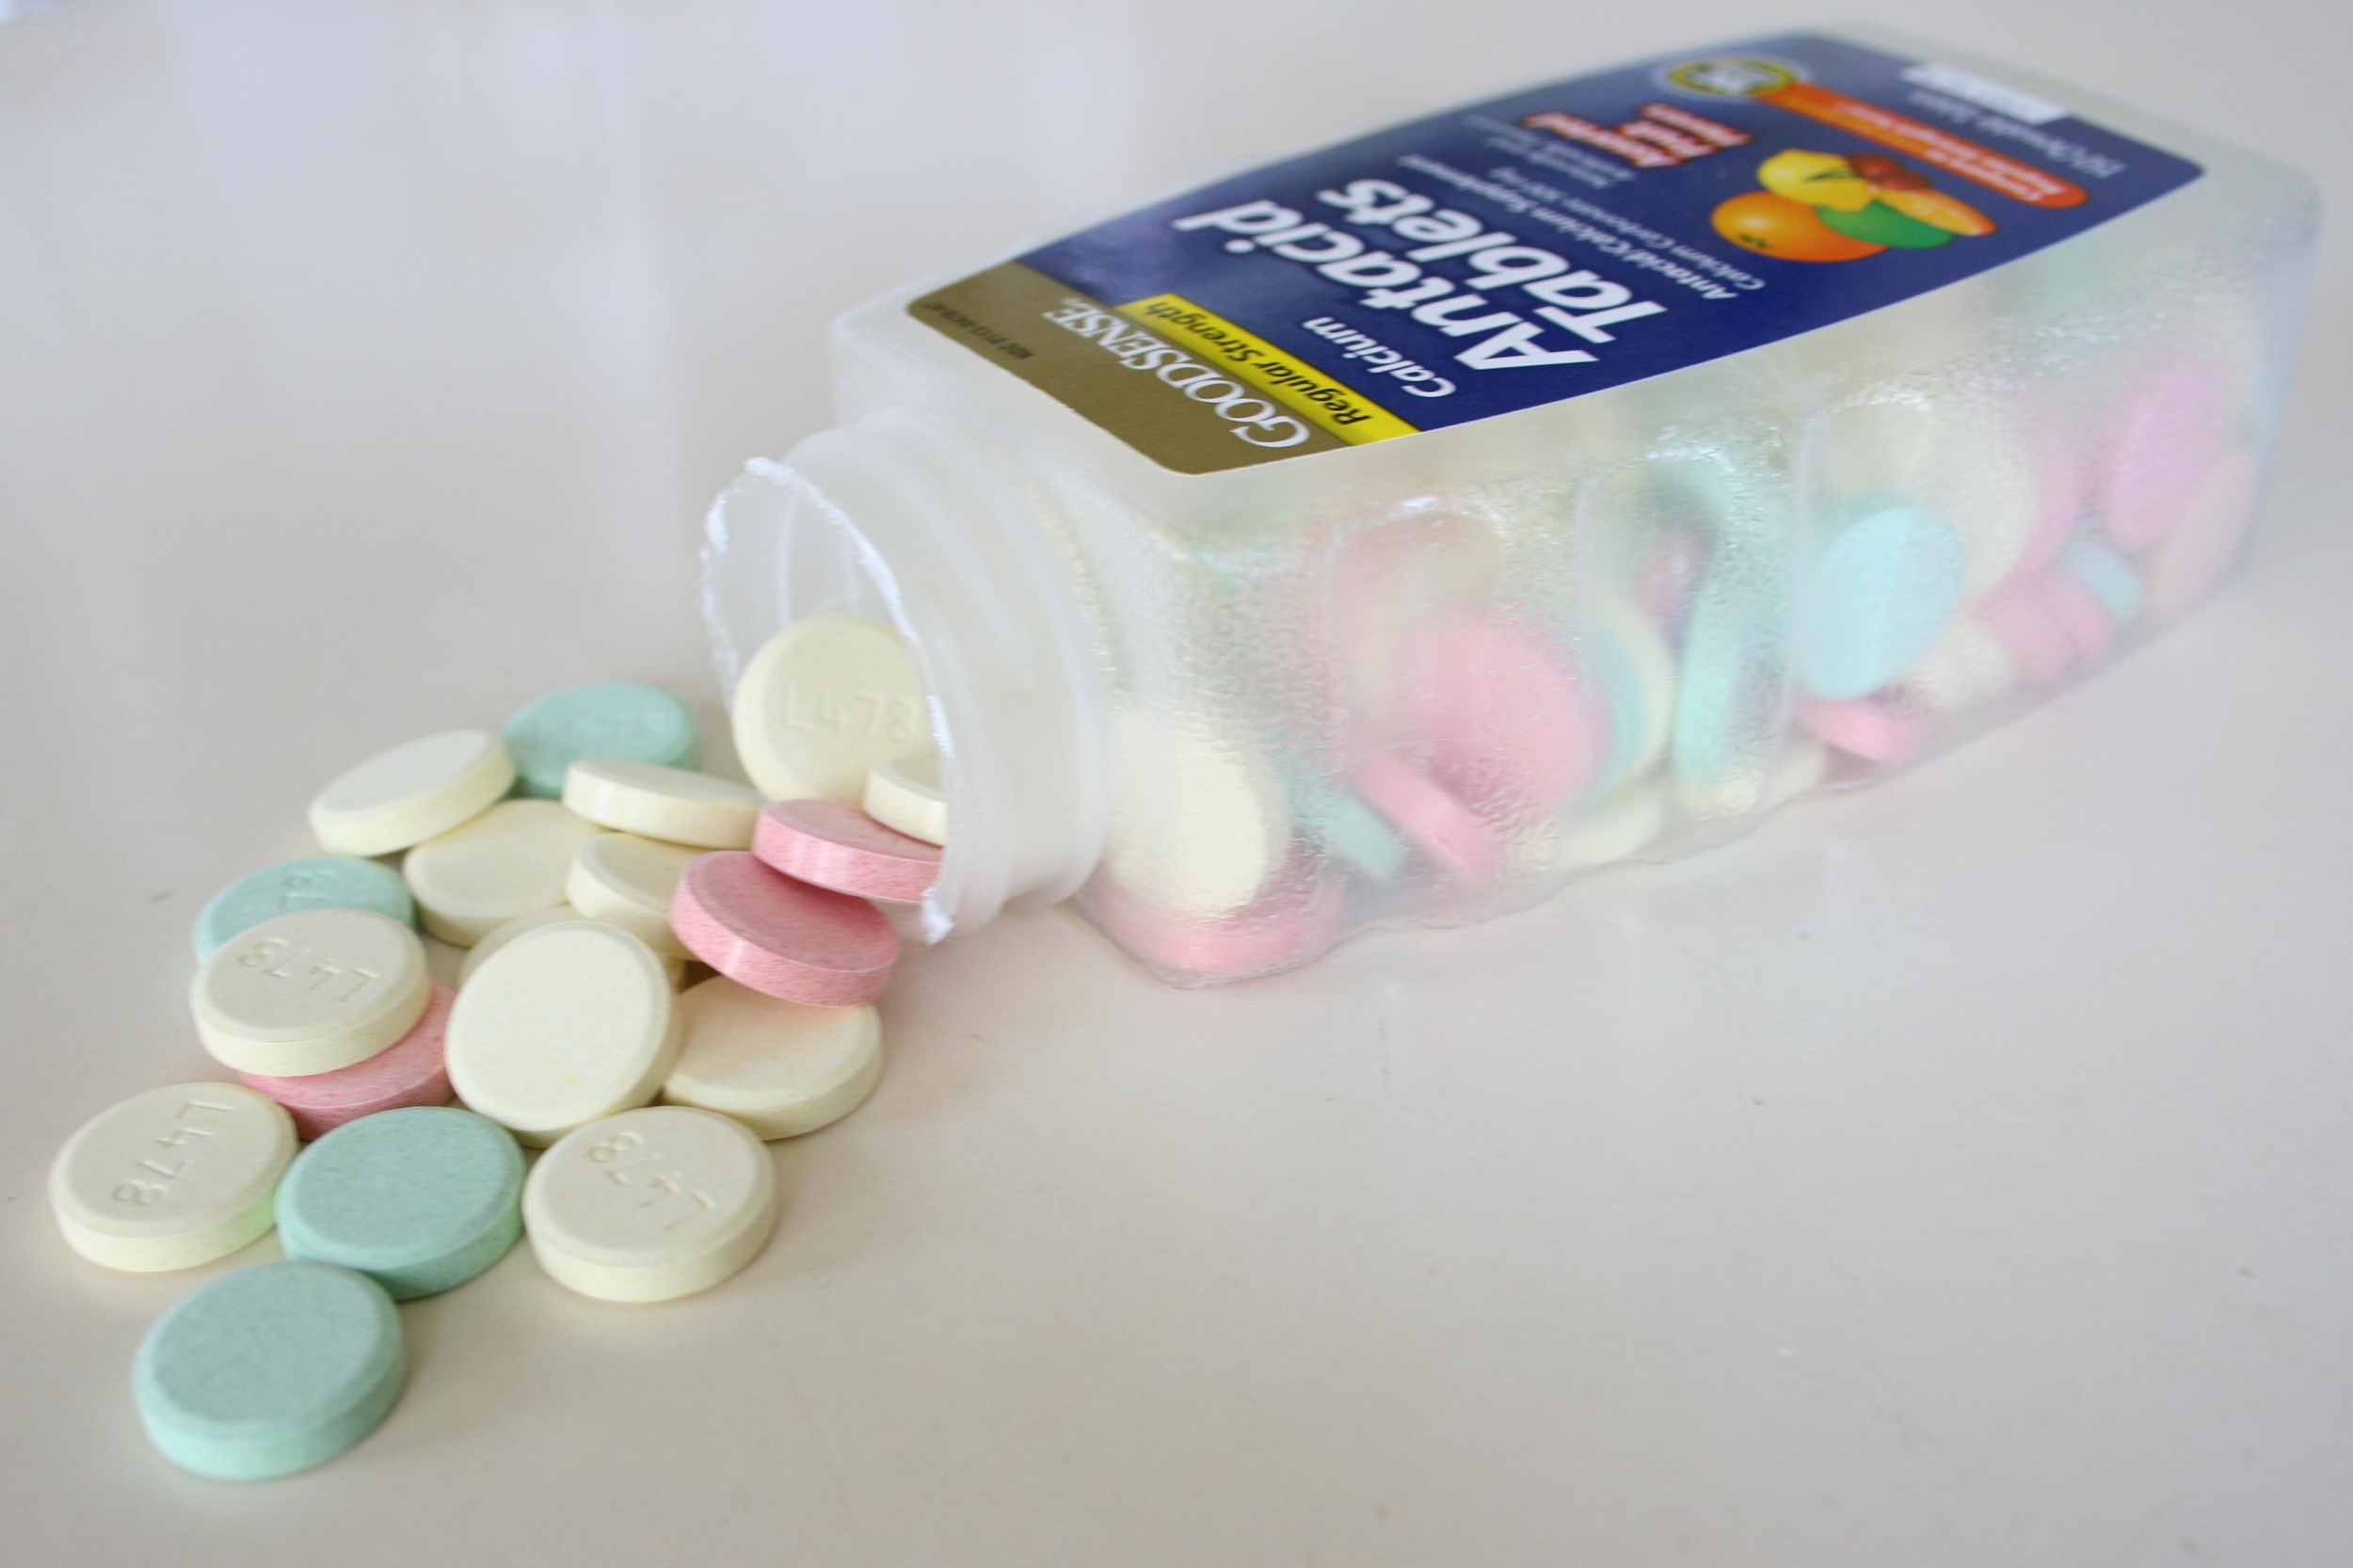 Photo of Antacid tablets bottle resting on side, with contents spilled out.